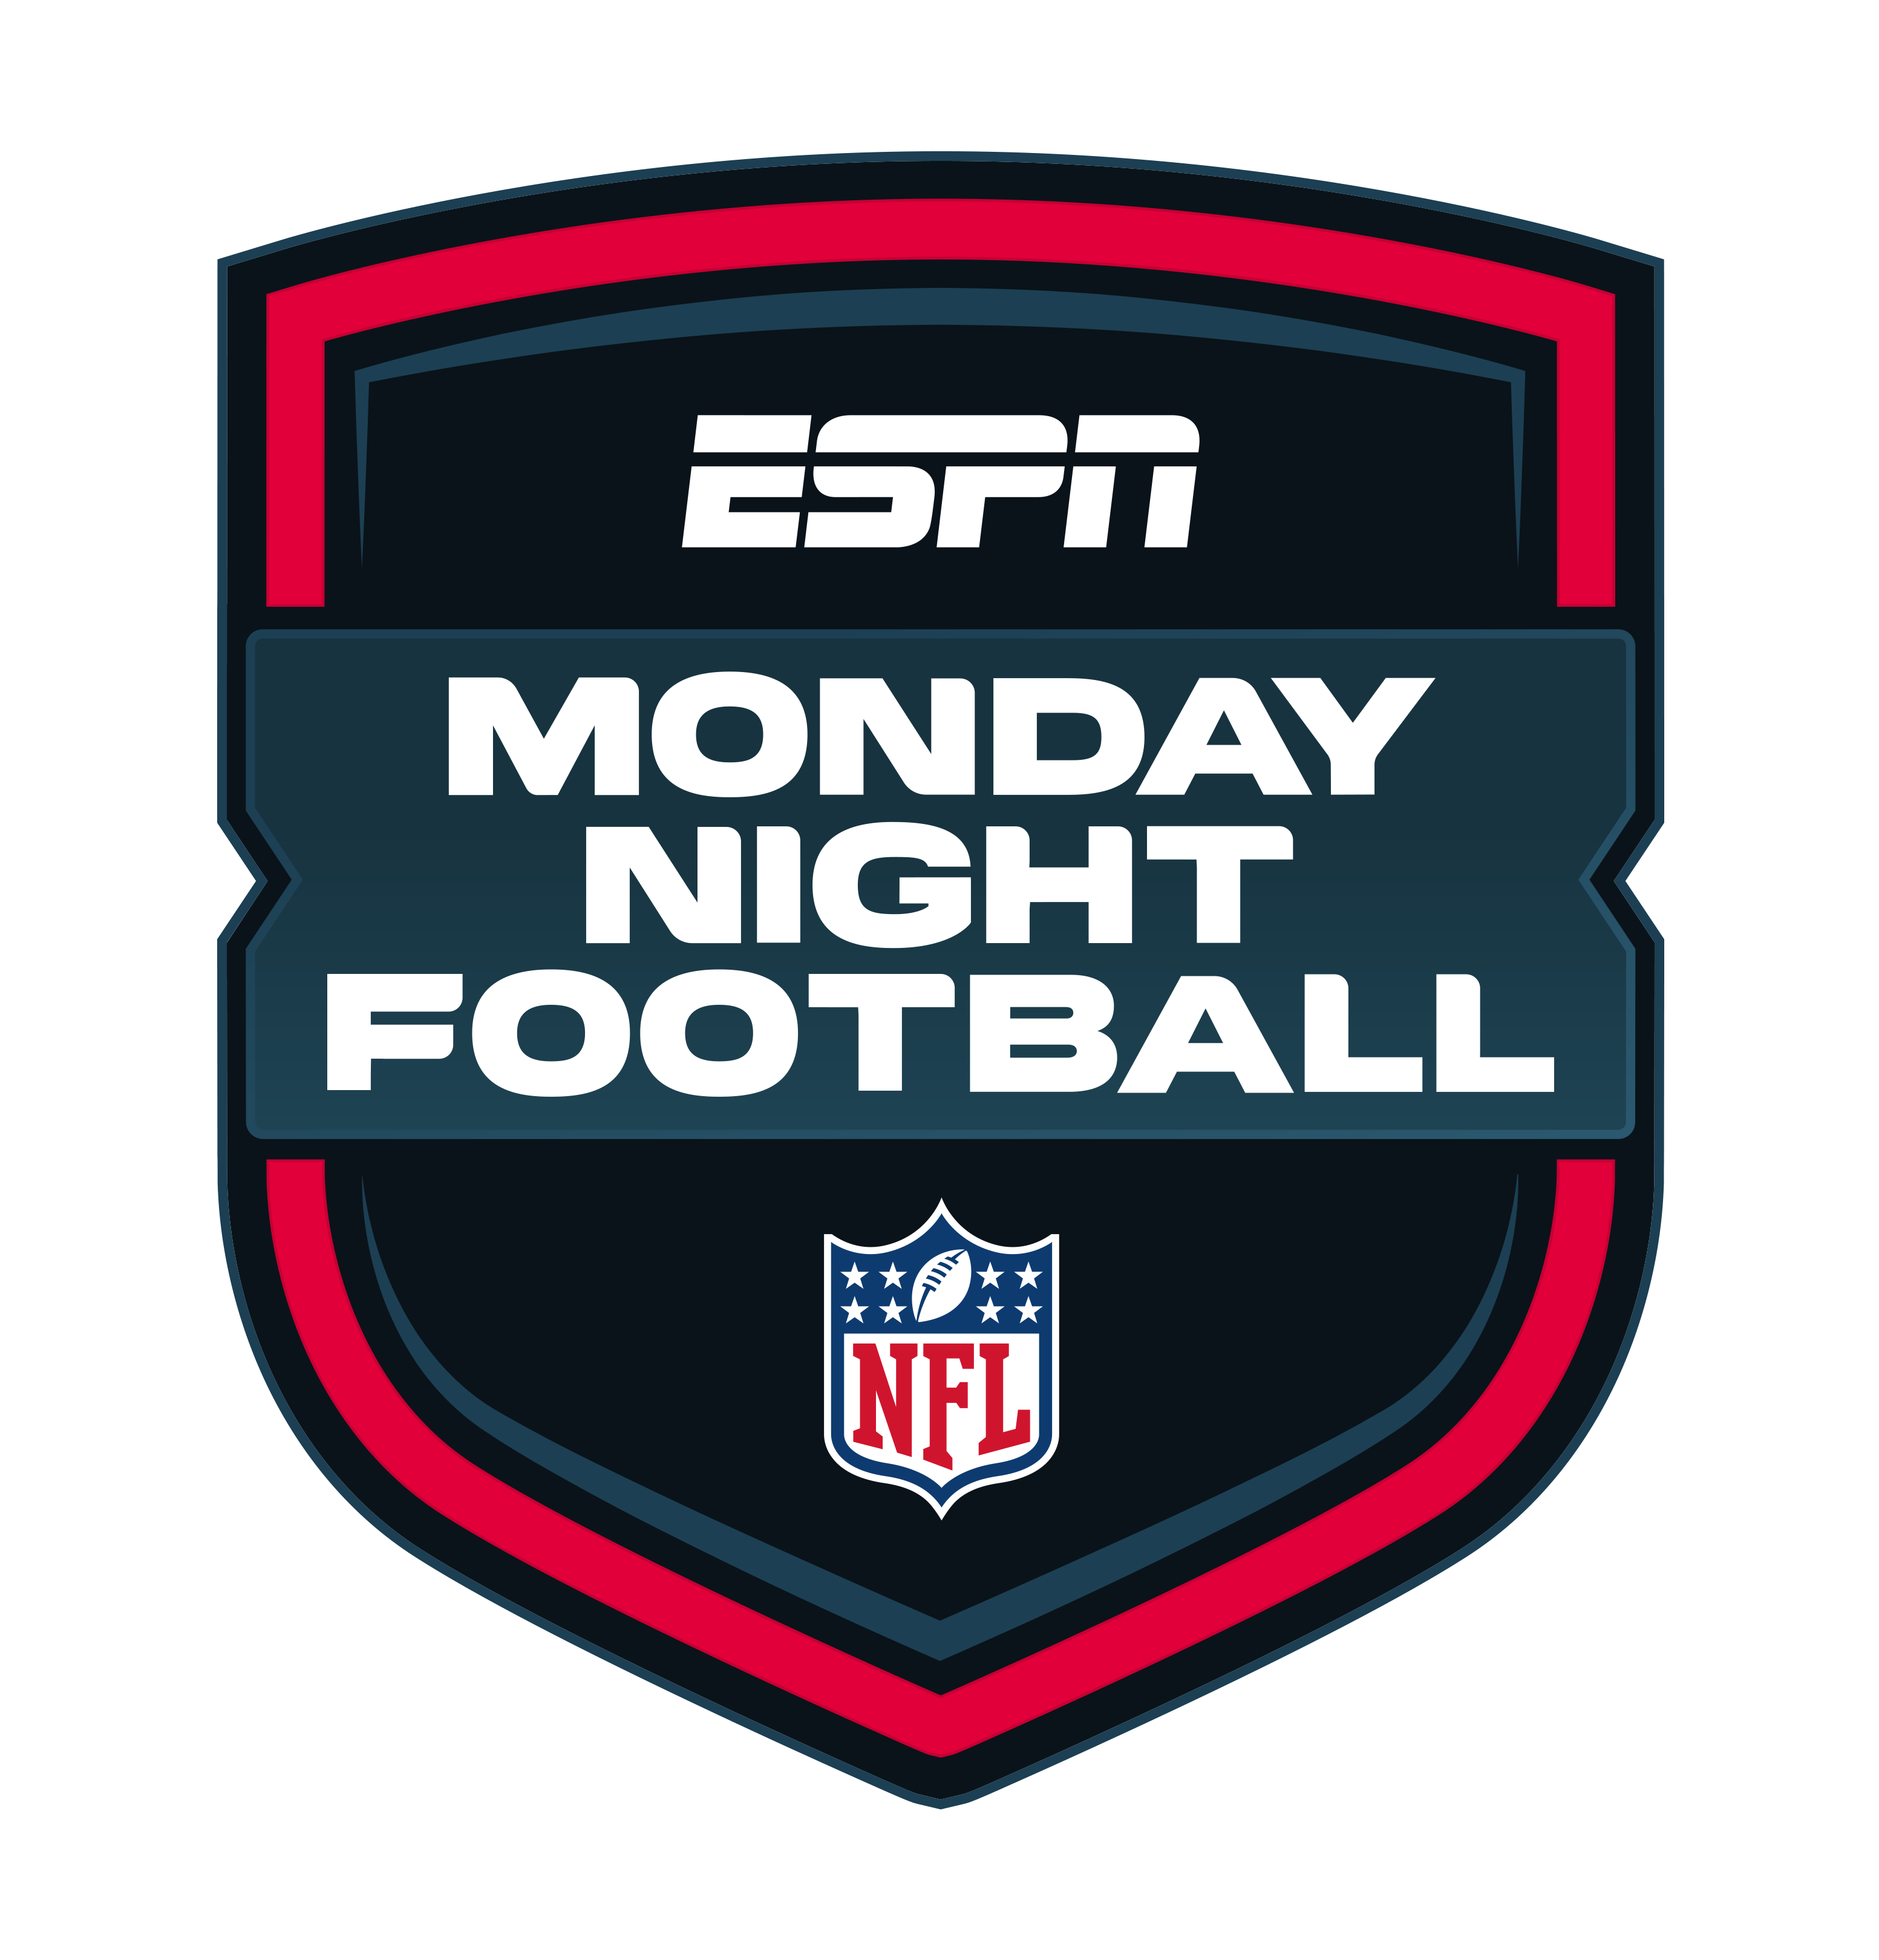 which teams are playing on monday night football tonight